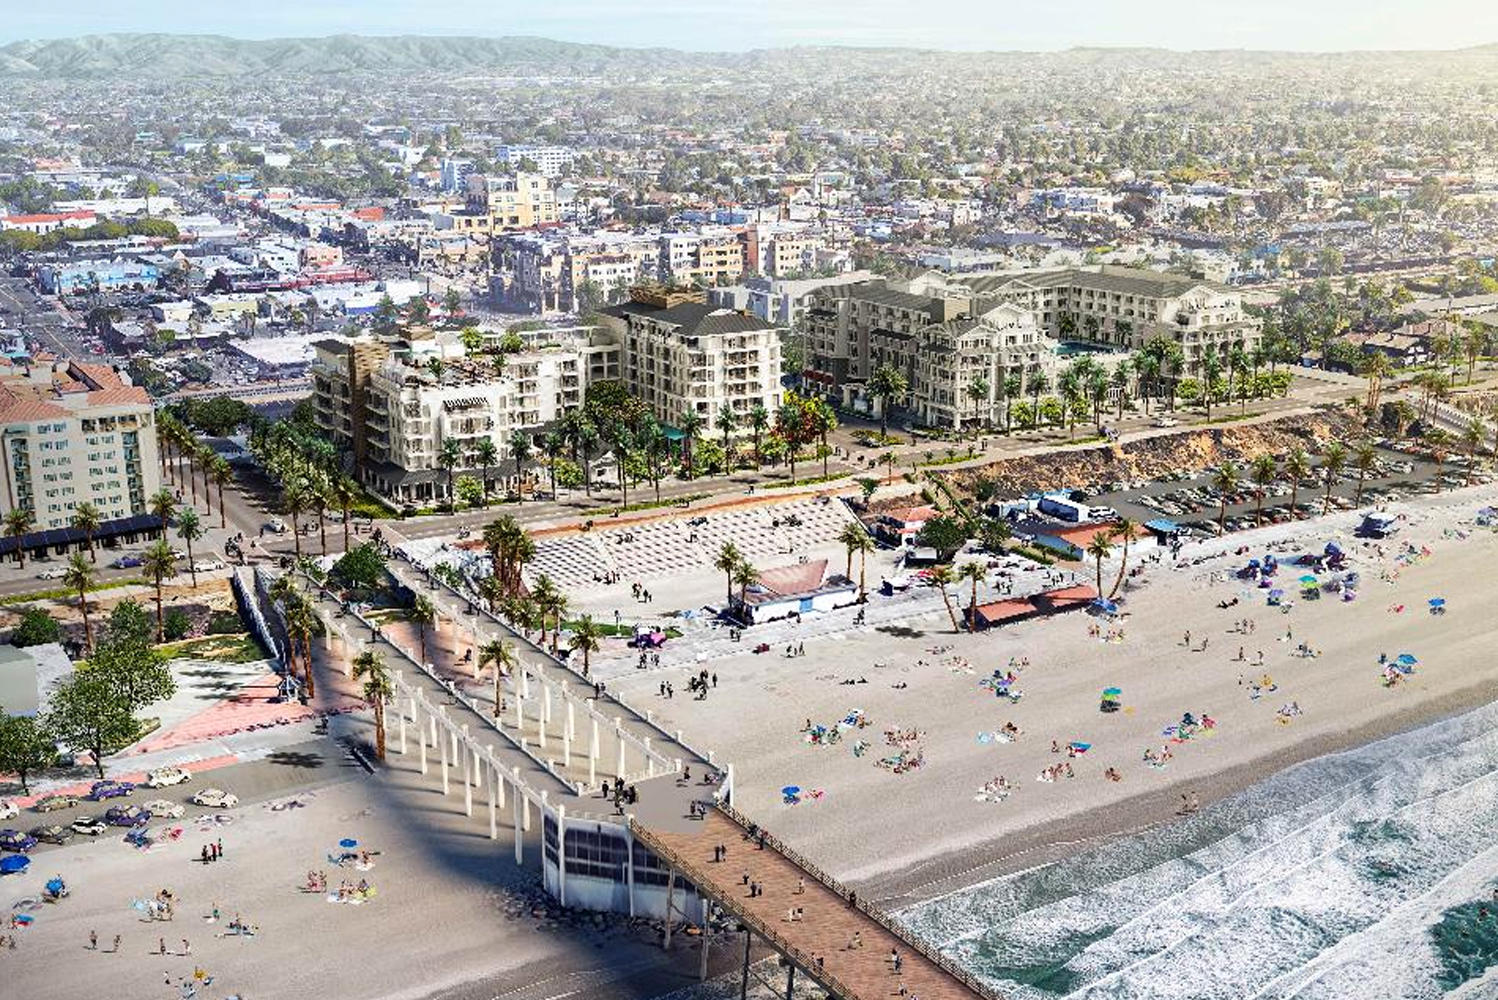 Two new beach resorts will open in Oceanside California One property will be a Joie de Vivre hotel the second a Destinatio